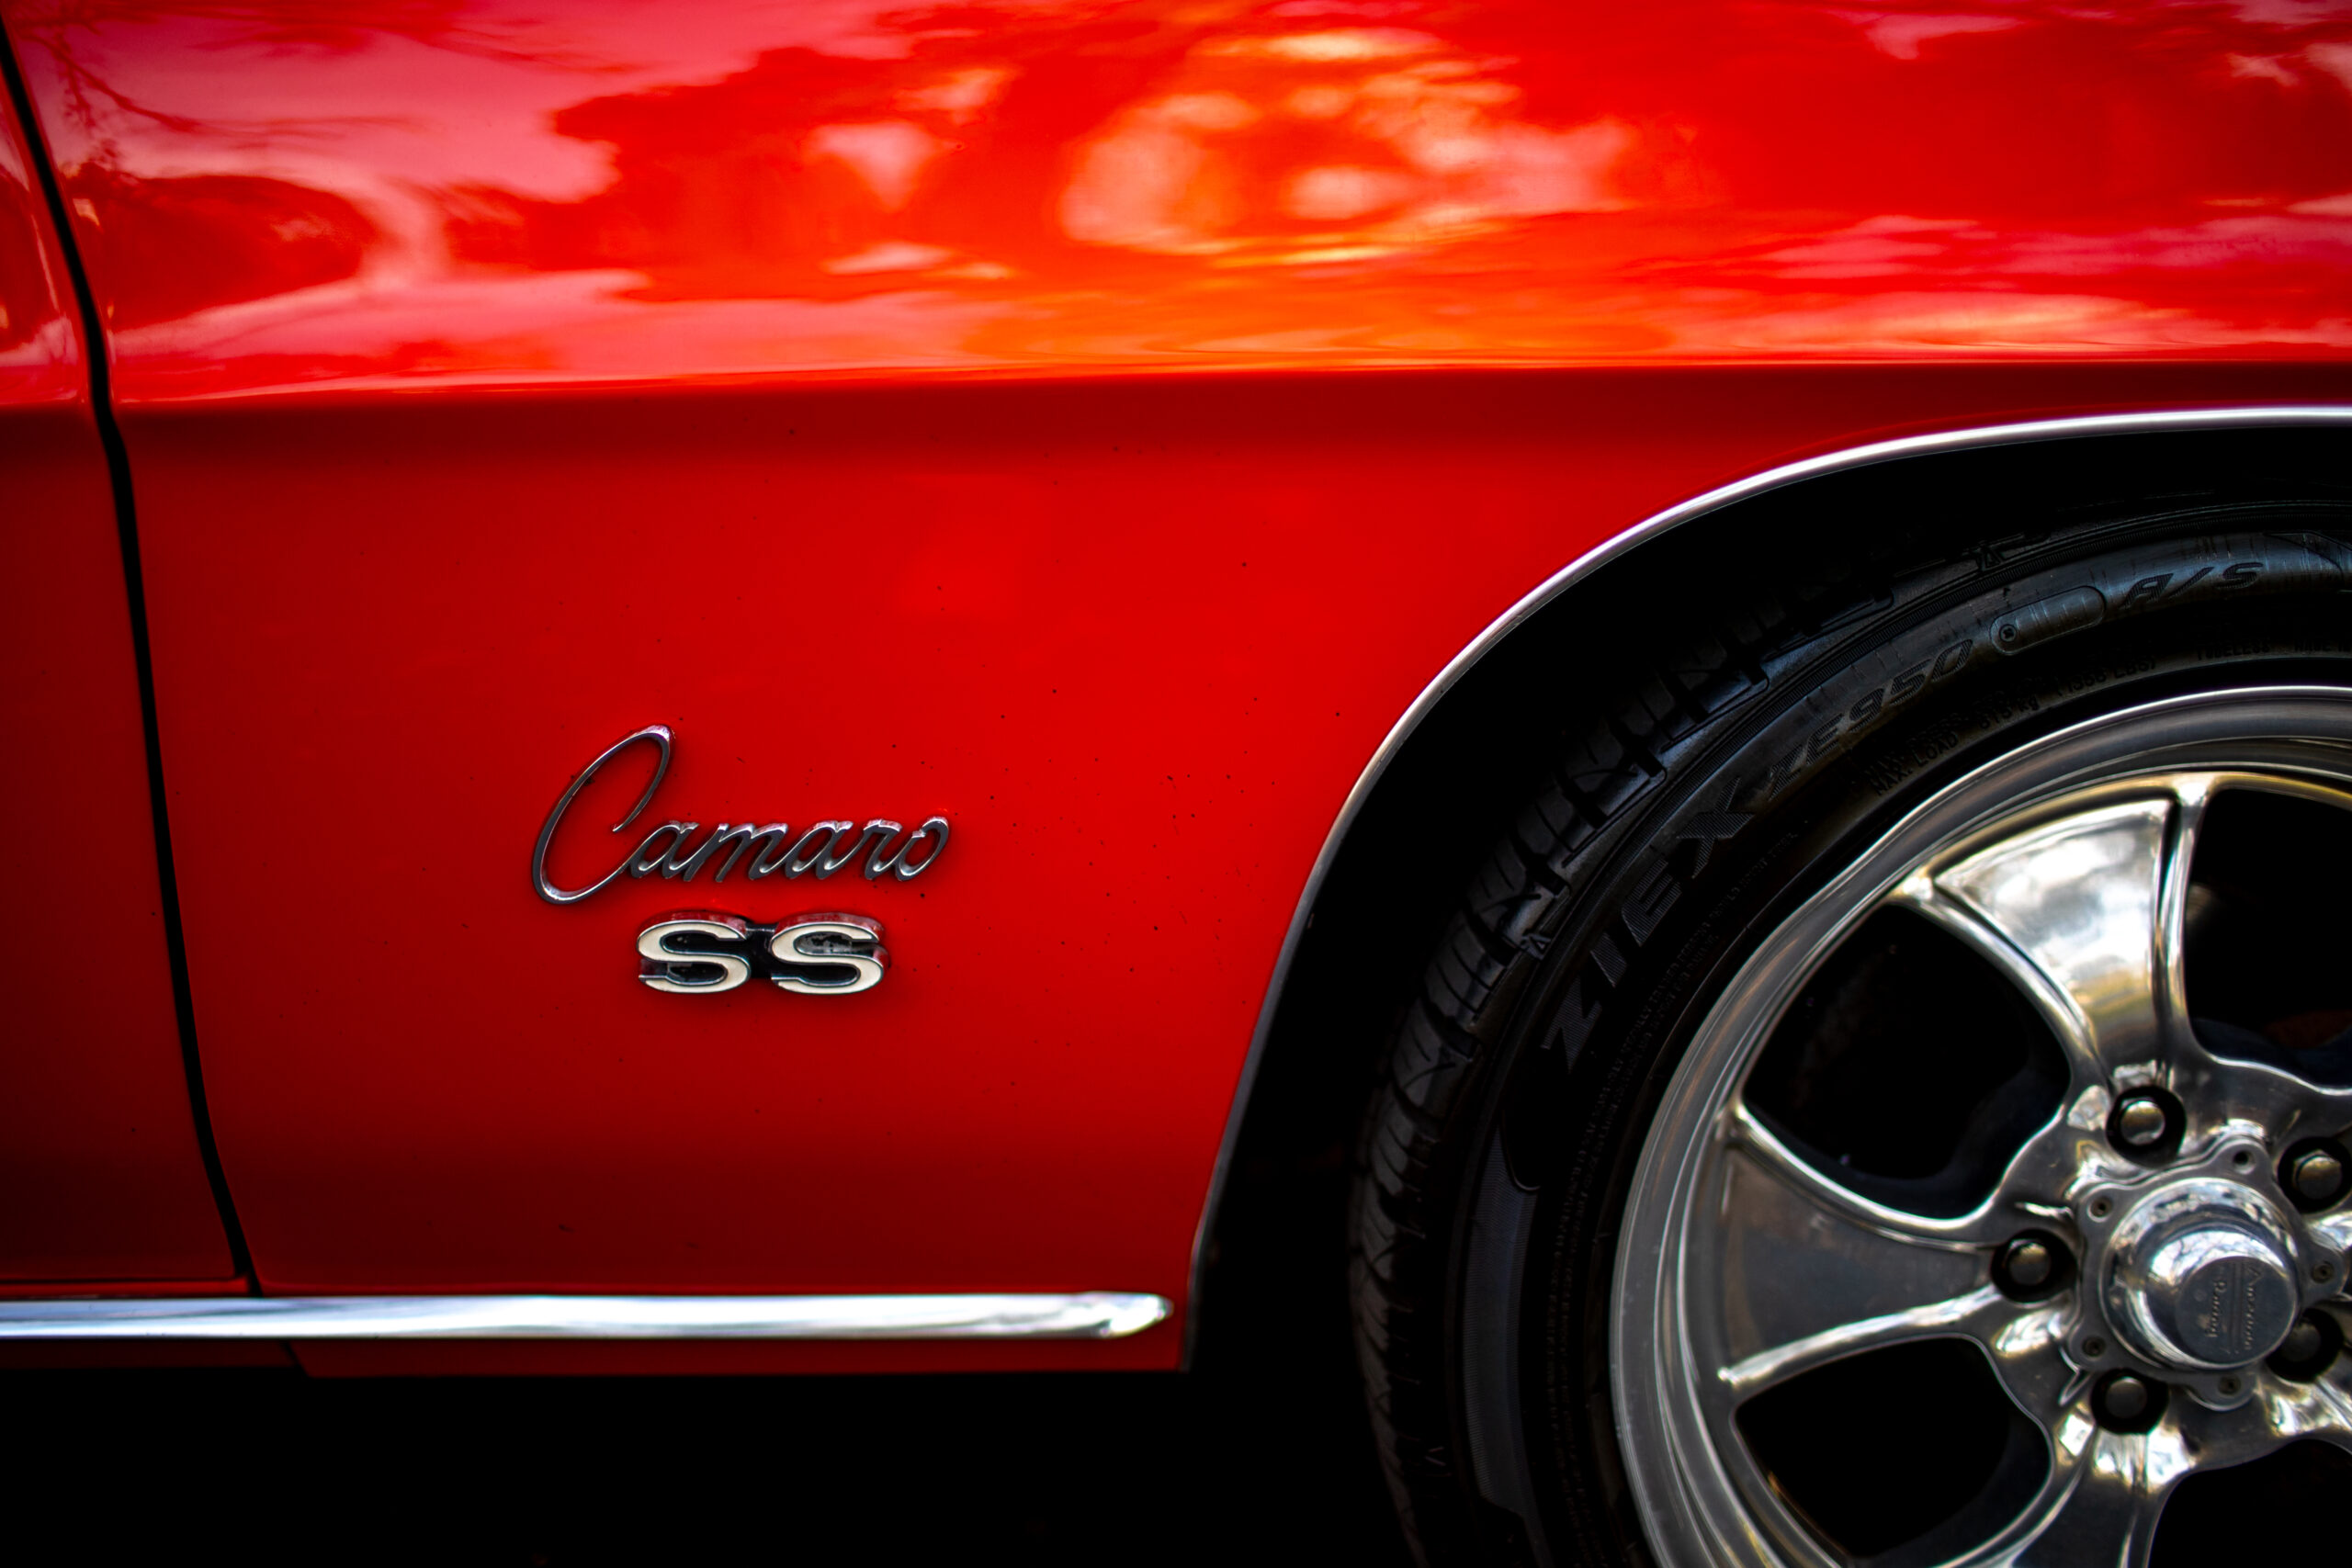 Close-up of a red Camaro SS showing the car's logo and part of a chrome-wheel with a shiny reflection.